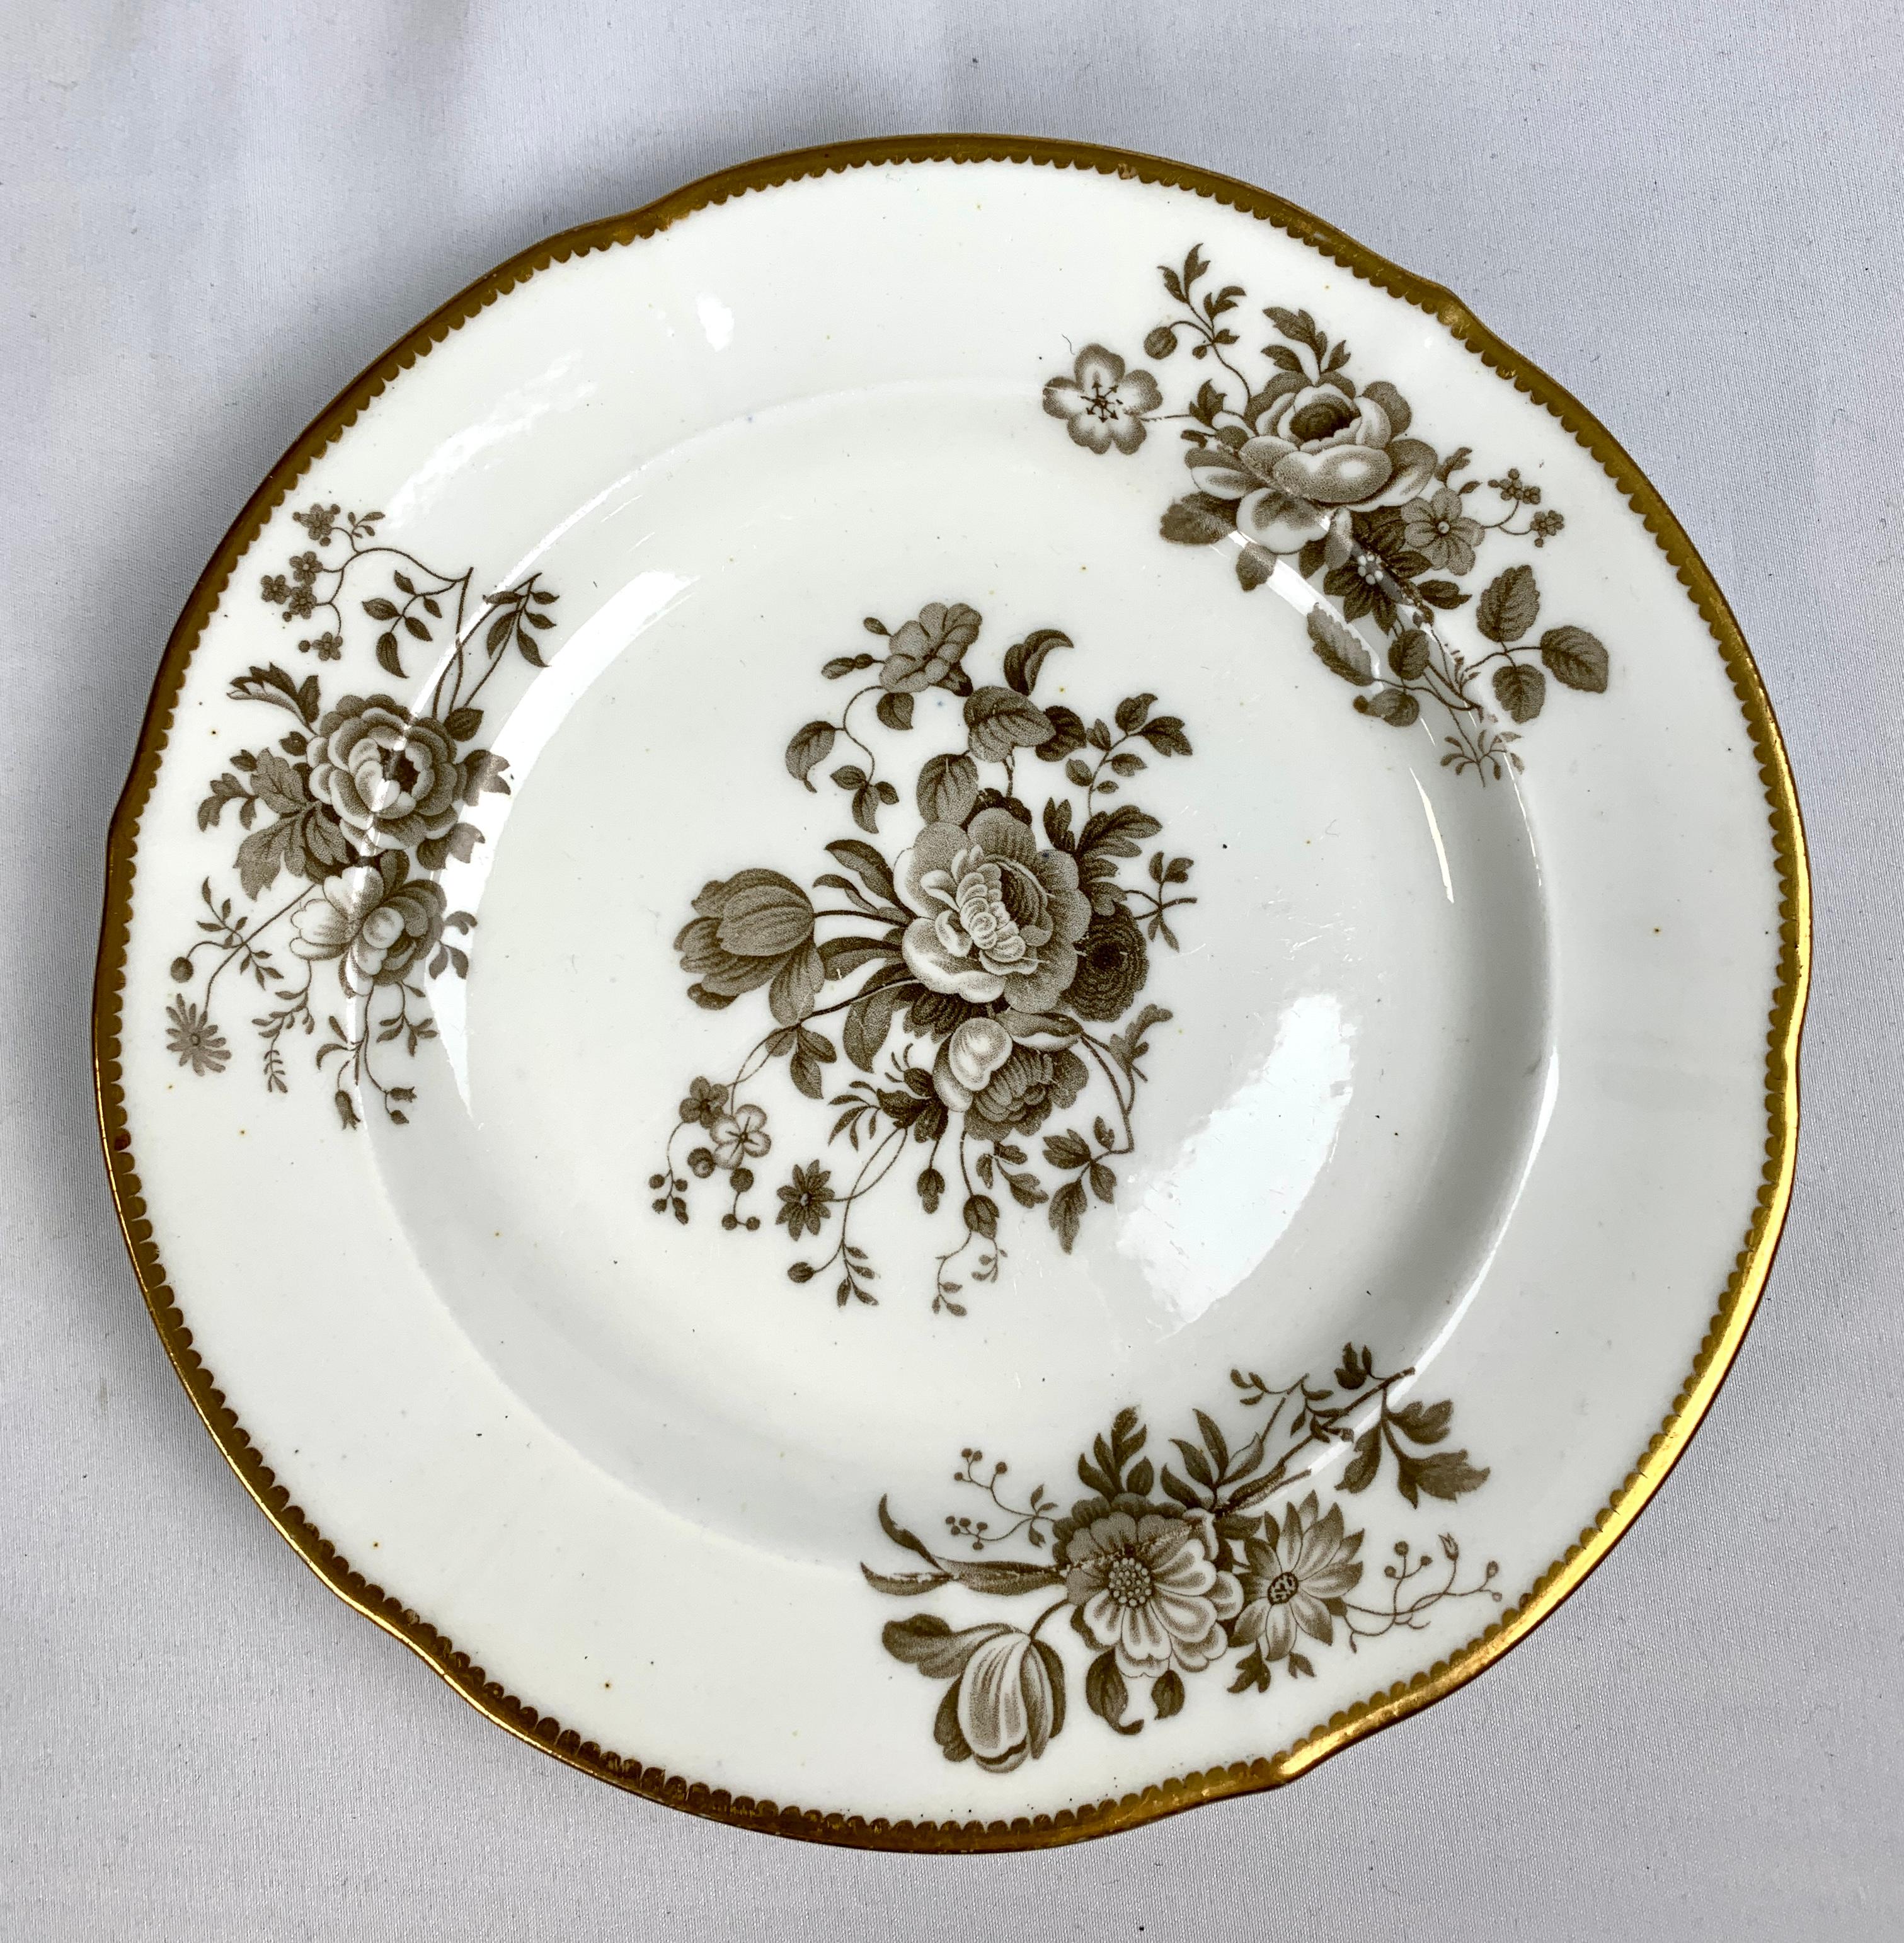 This set of a dozen Minton dessert plates was made in England circa 1835.
The beautiful grisaille decoration shows a center bouquet of lovely roses and morning glory and along the border, three bouquets of chrysanthemums, daisies, and